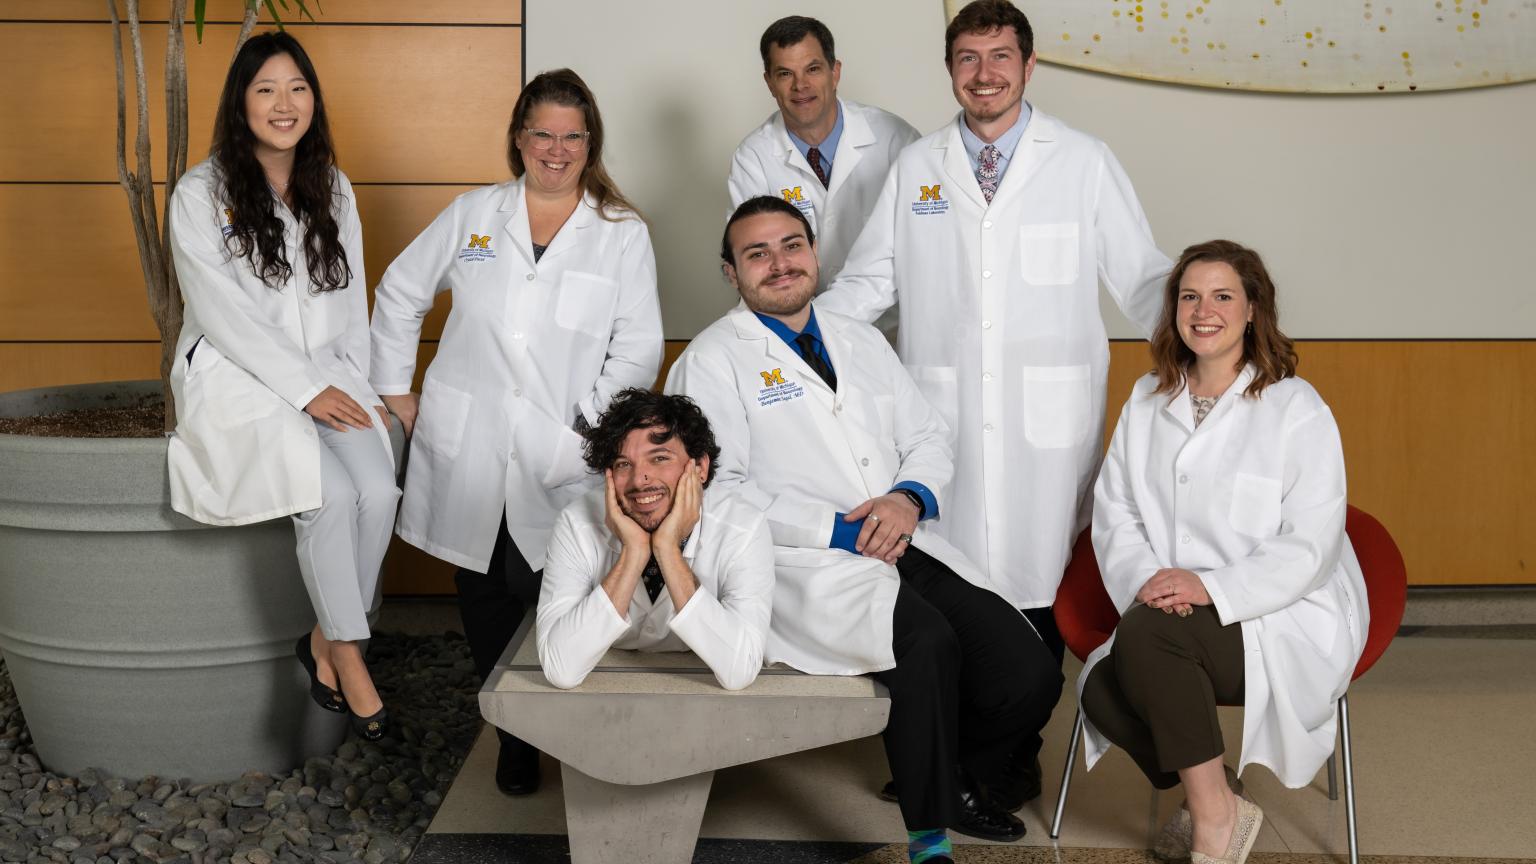 a photo of the lab techs from the NeuroNetwork for Emerging Therapies